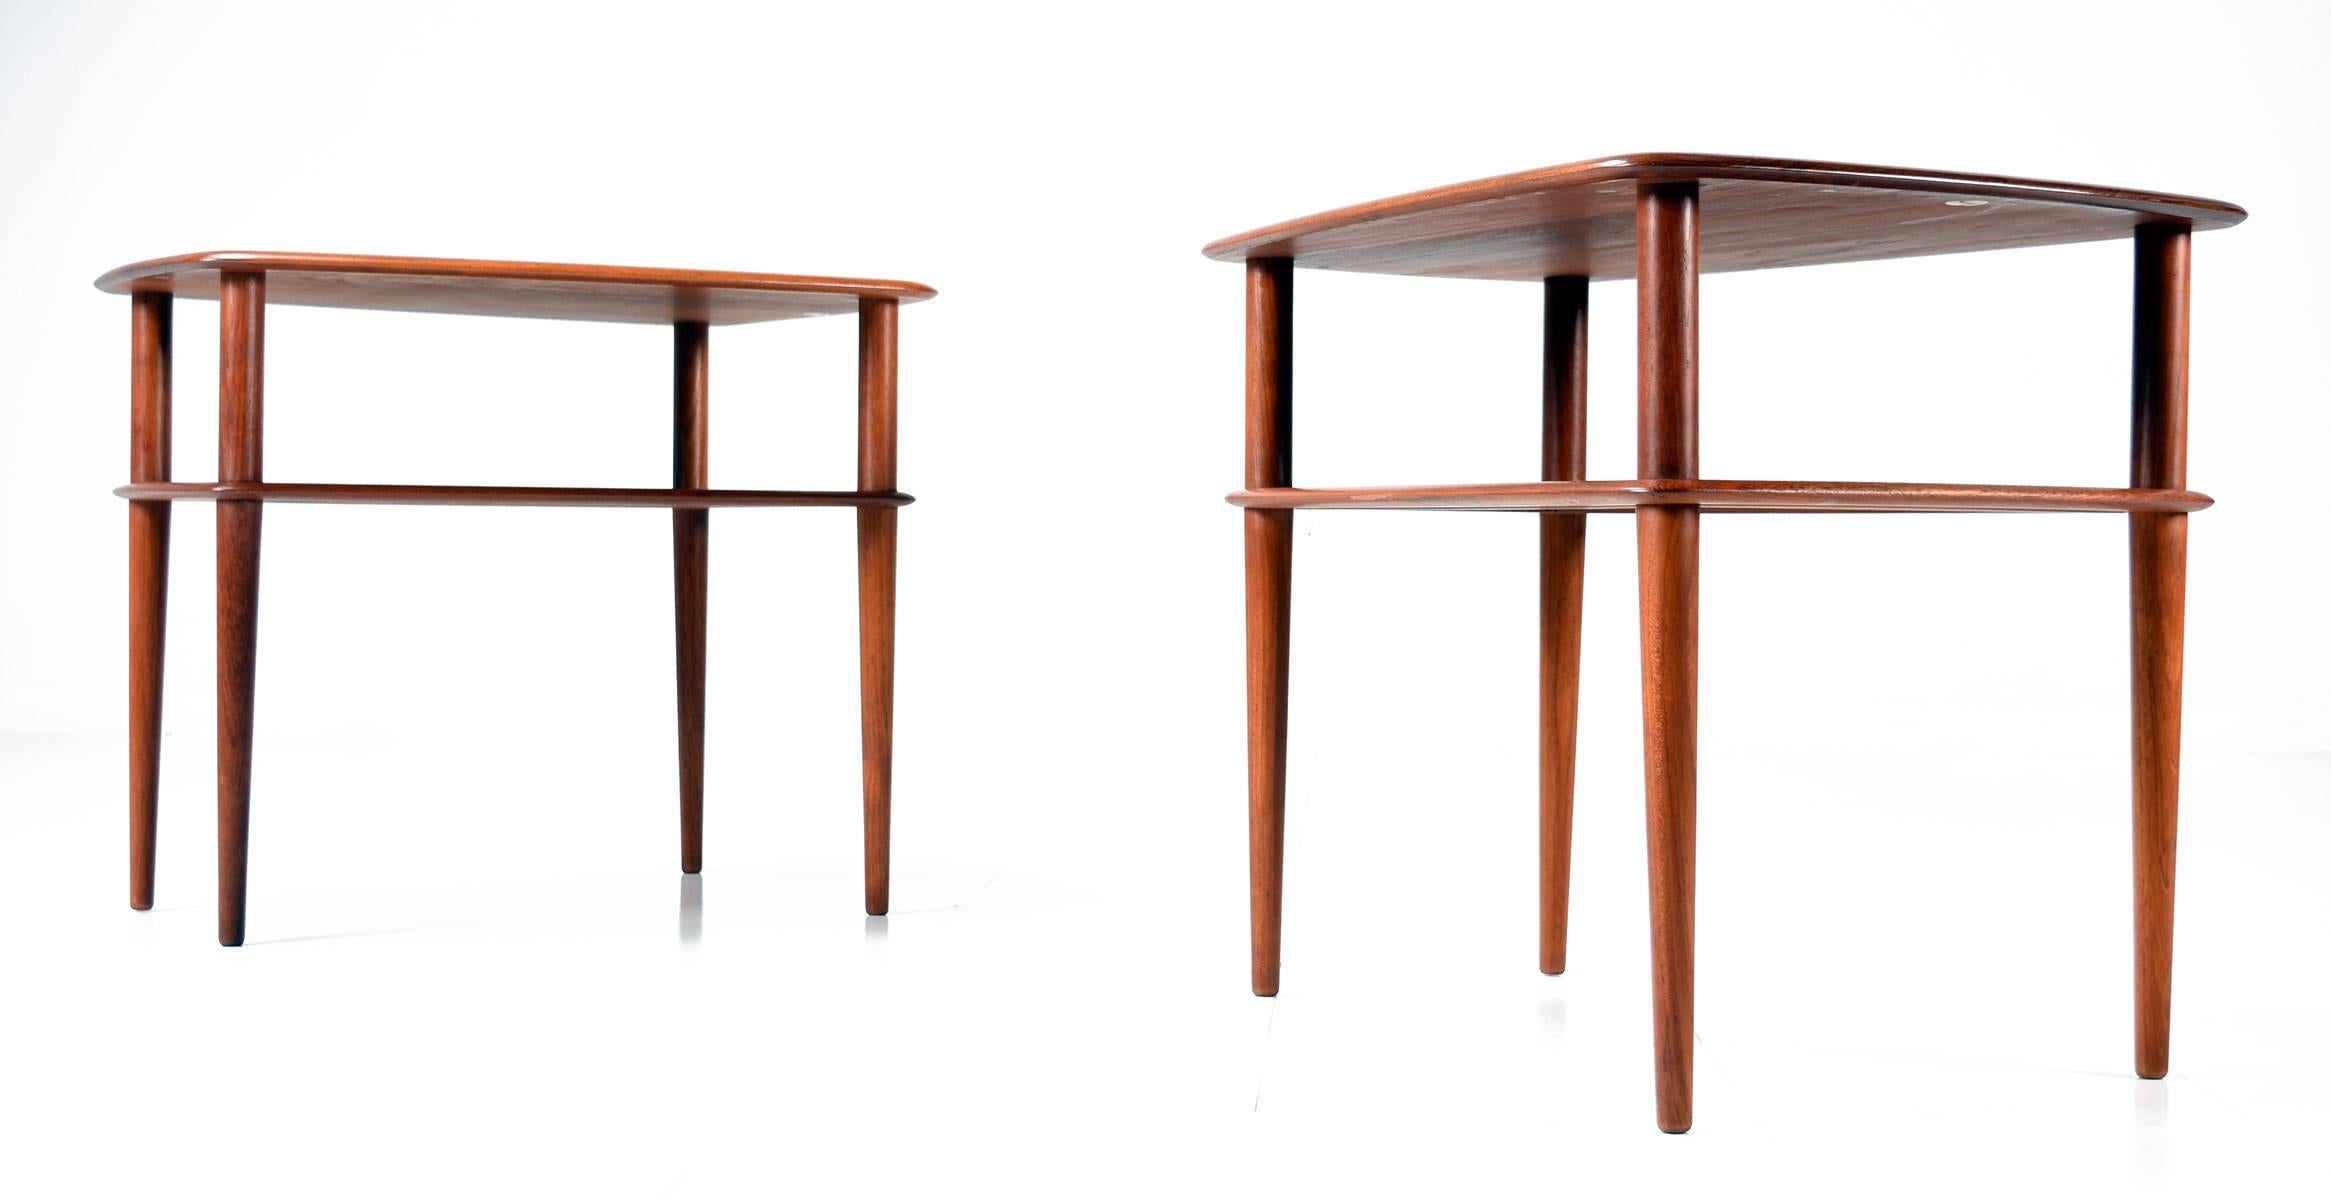 Pair of Mid-Century Modern solid teak end tables designed by Peter Hvidt and Orla Mølgaard-Nielsen for France & Sons. The lower shelves or magazine rack have the original caned inserts, surrounded by solid teak frame. The pair are a trazezoid shape,